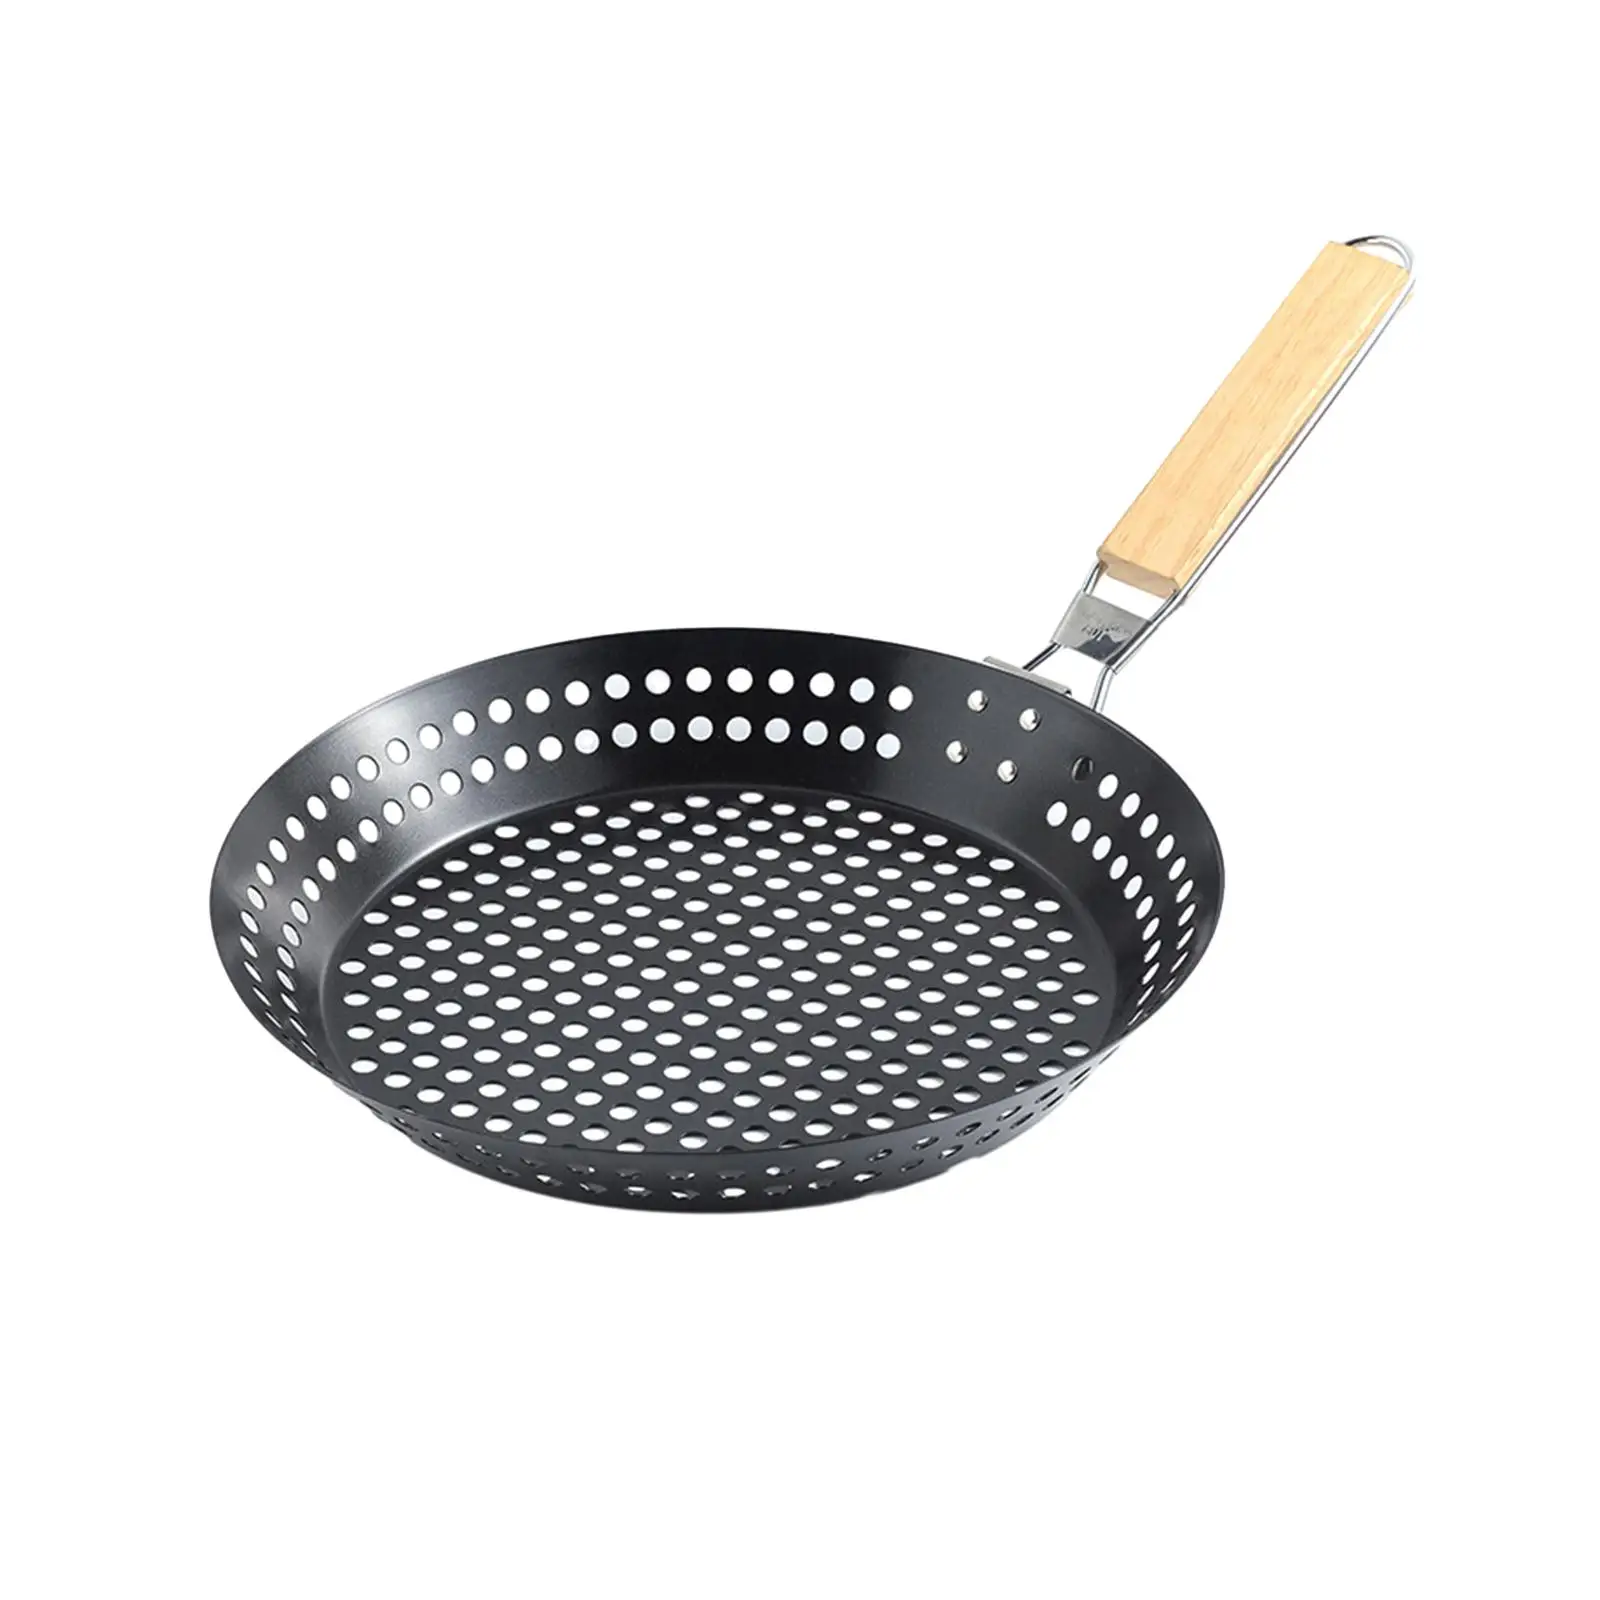 Bakeware Grill Pan Durable Easily Clean Perforated Roasting Cooking Outdoor Pan for Frying Outdoor Baking Travel Cooking